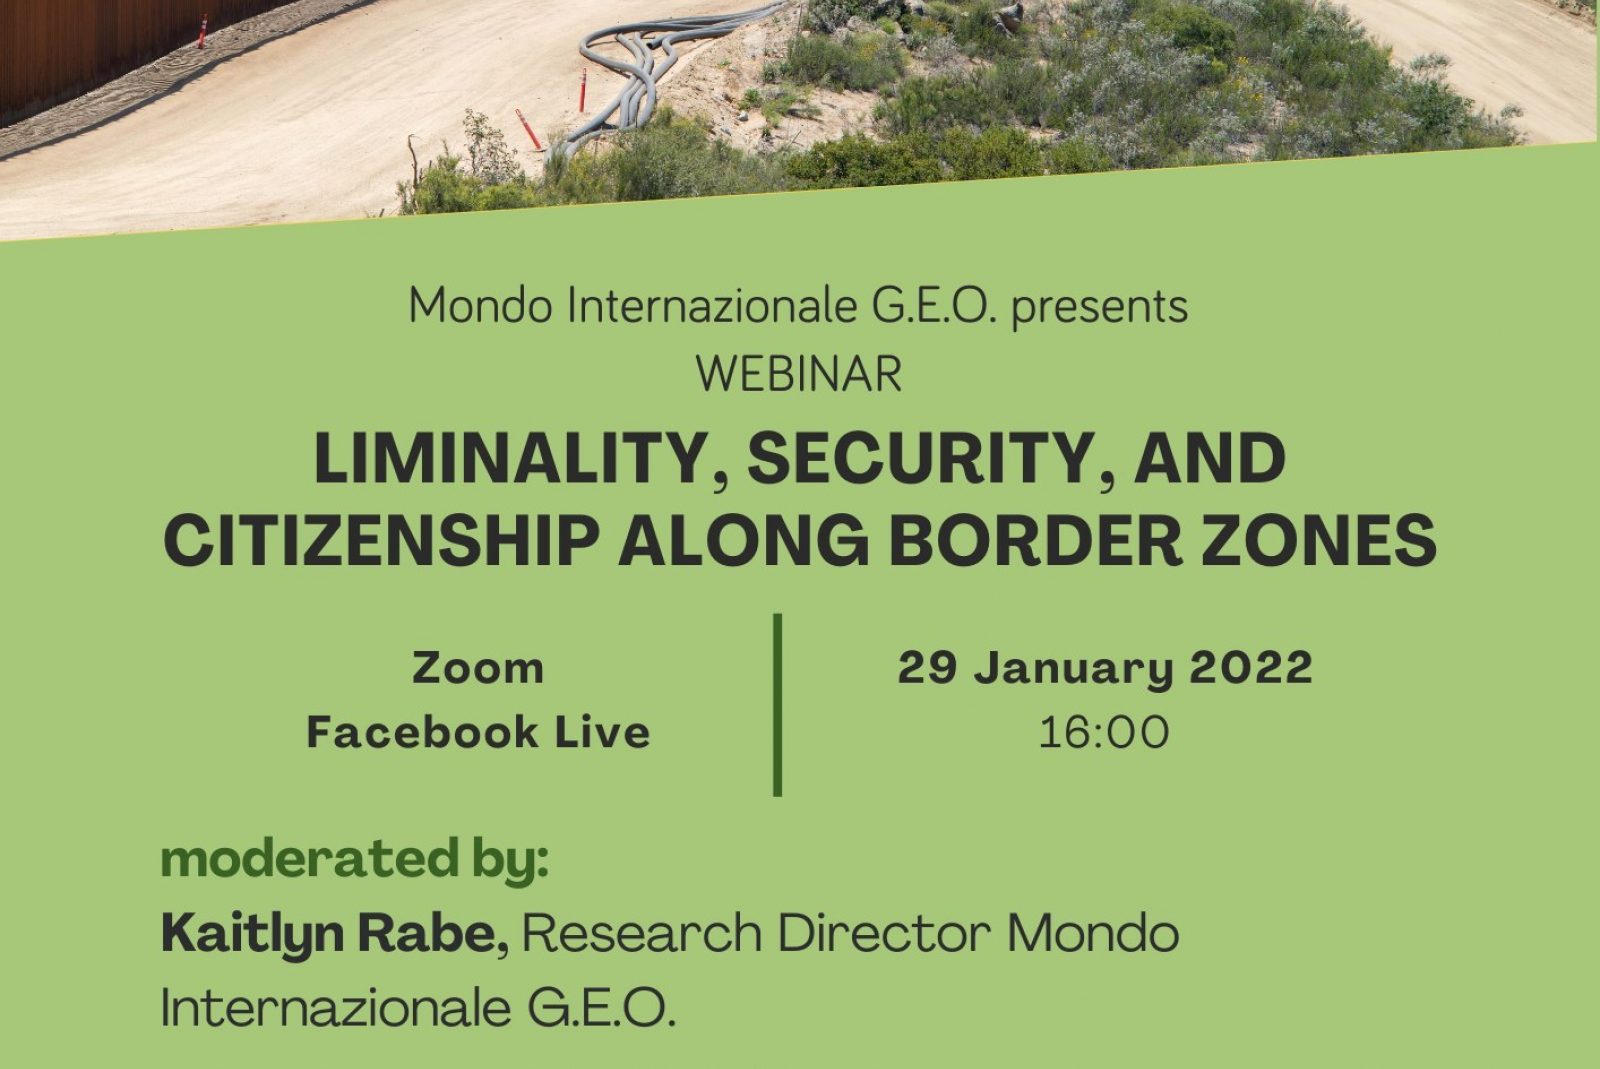 Liminality, Security, and Citizenship along Border Zones - 29.01.2022